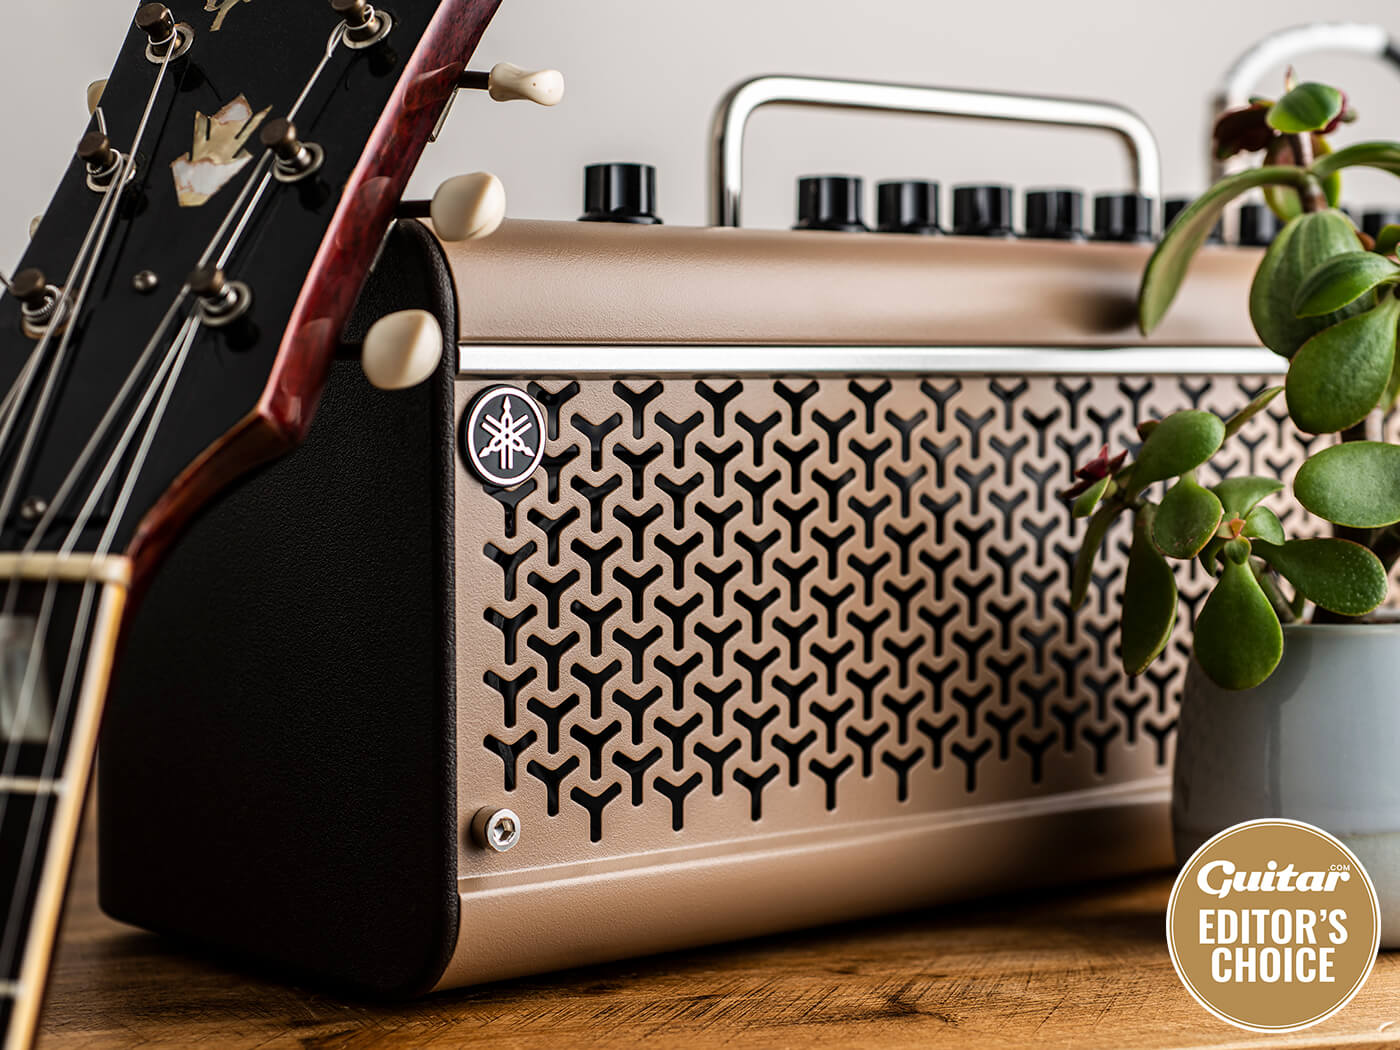 Yamaha THR30IIA review: The portable acoustic amp you need for